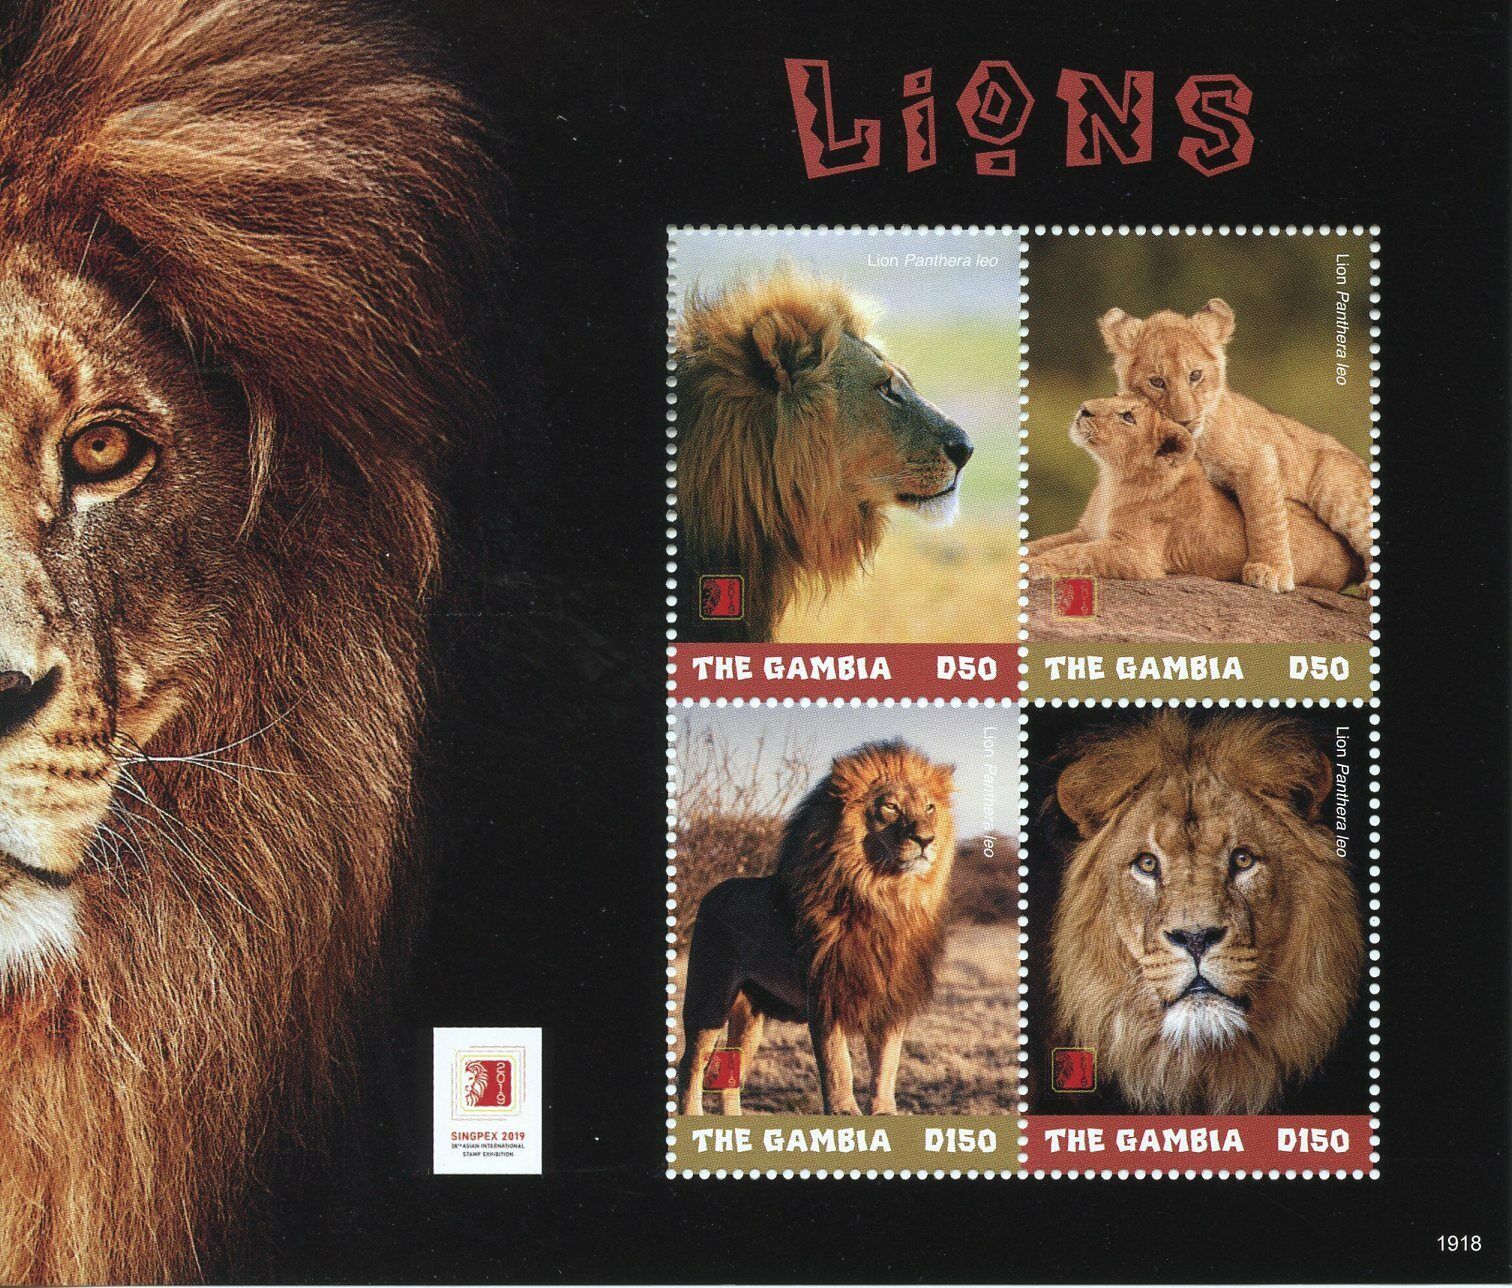 Gambia 2019 MNH Wild Animals Stamps Lions Singpex 2019 Big Cats 4v M/S